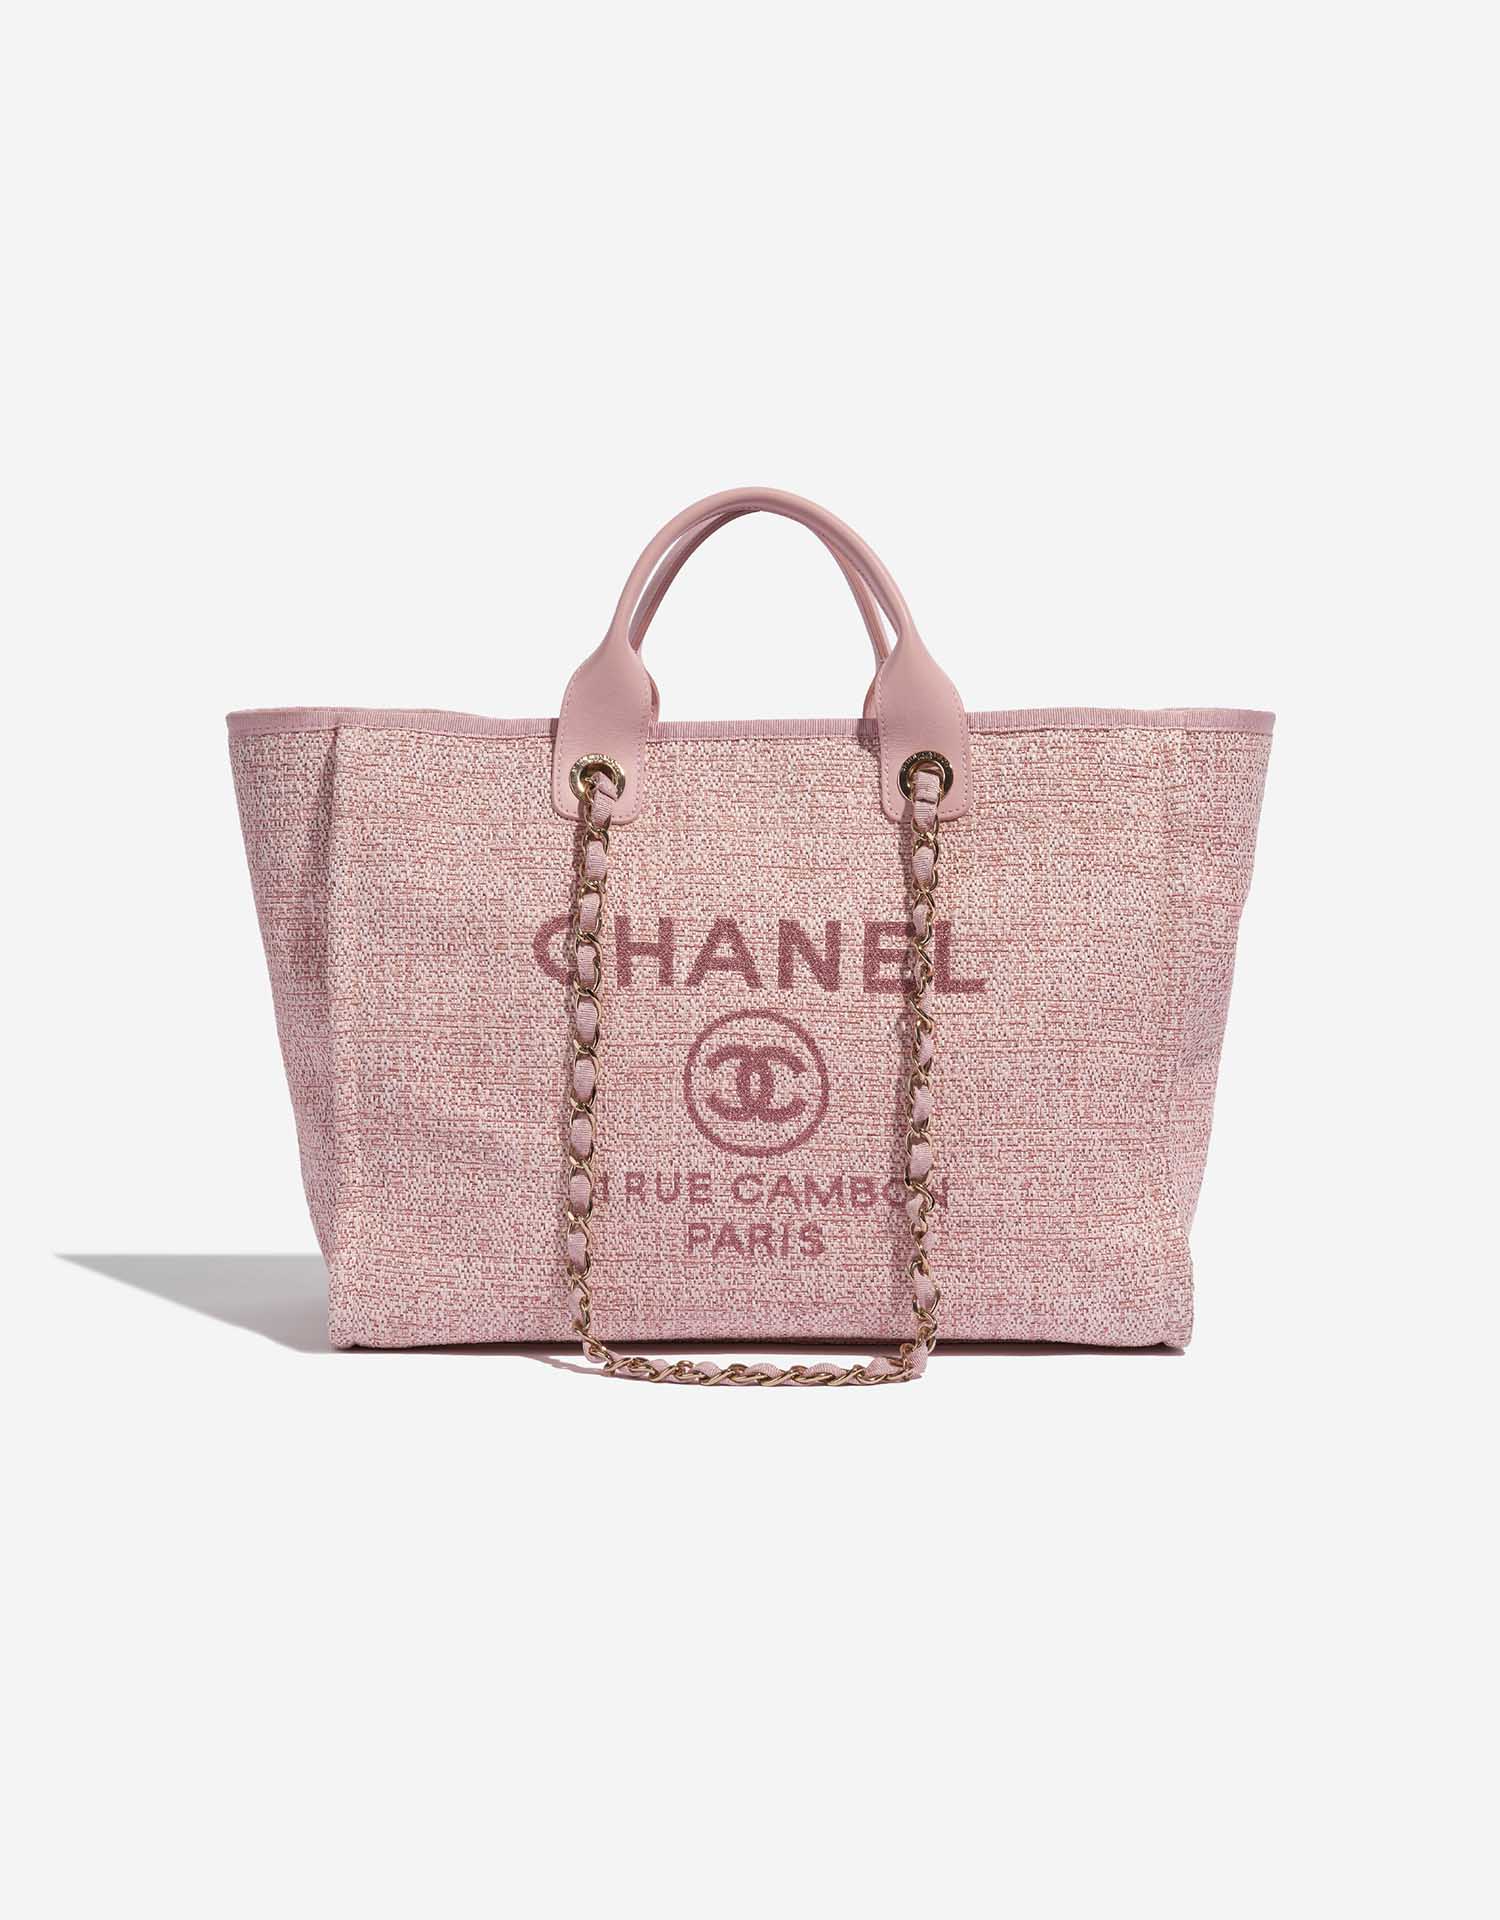 chanel deauville bag pink